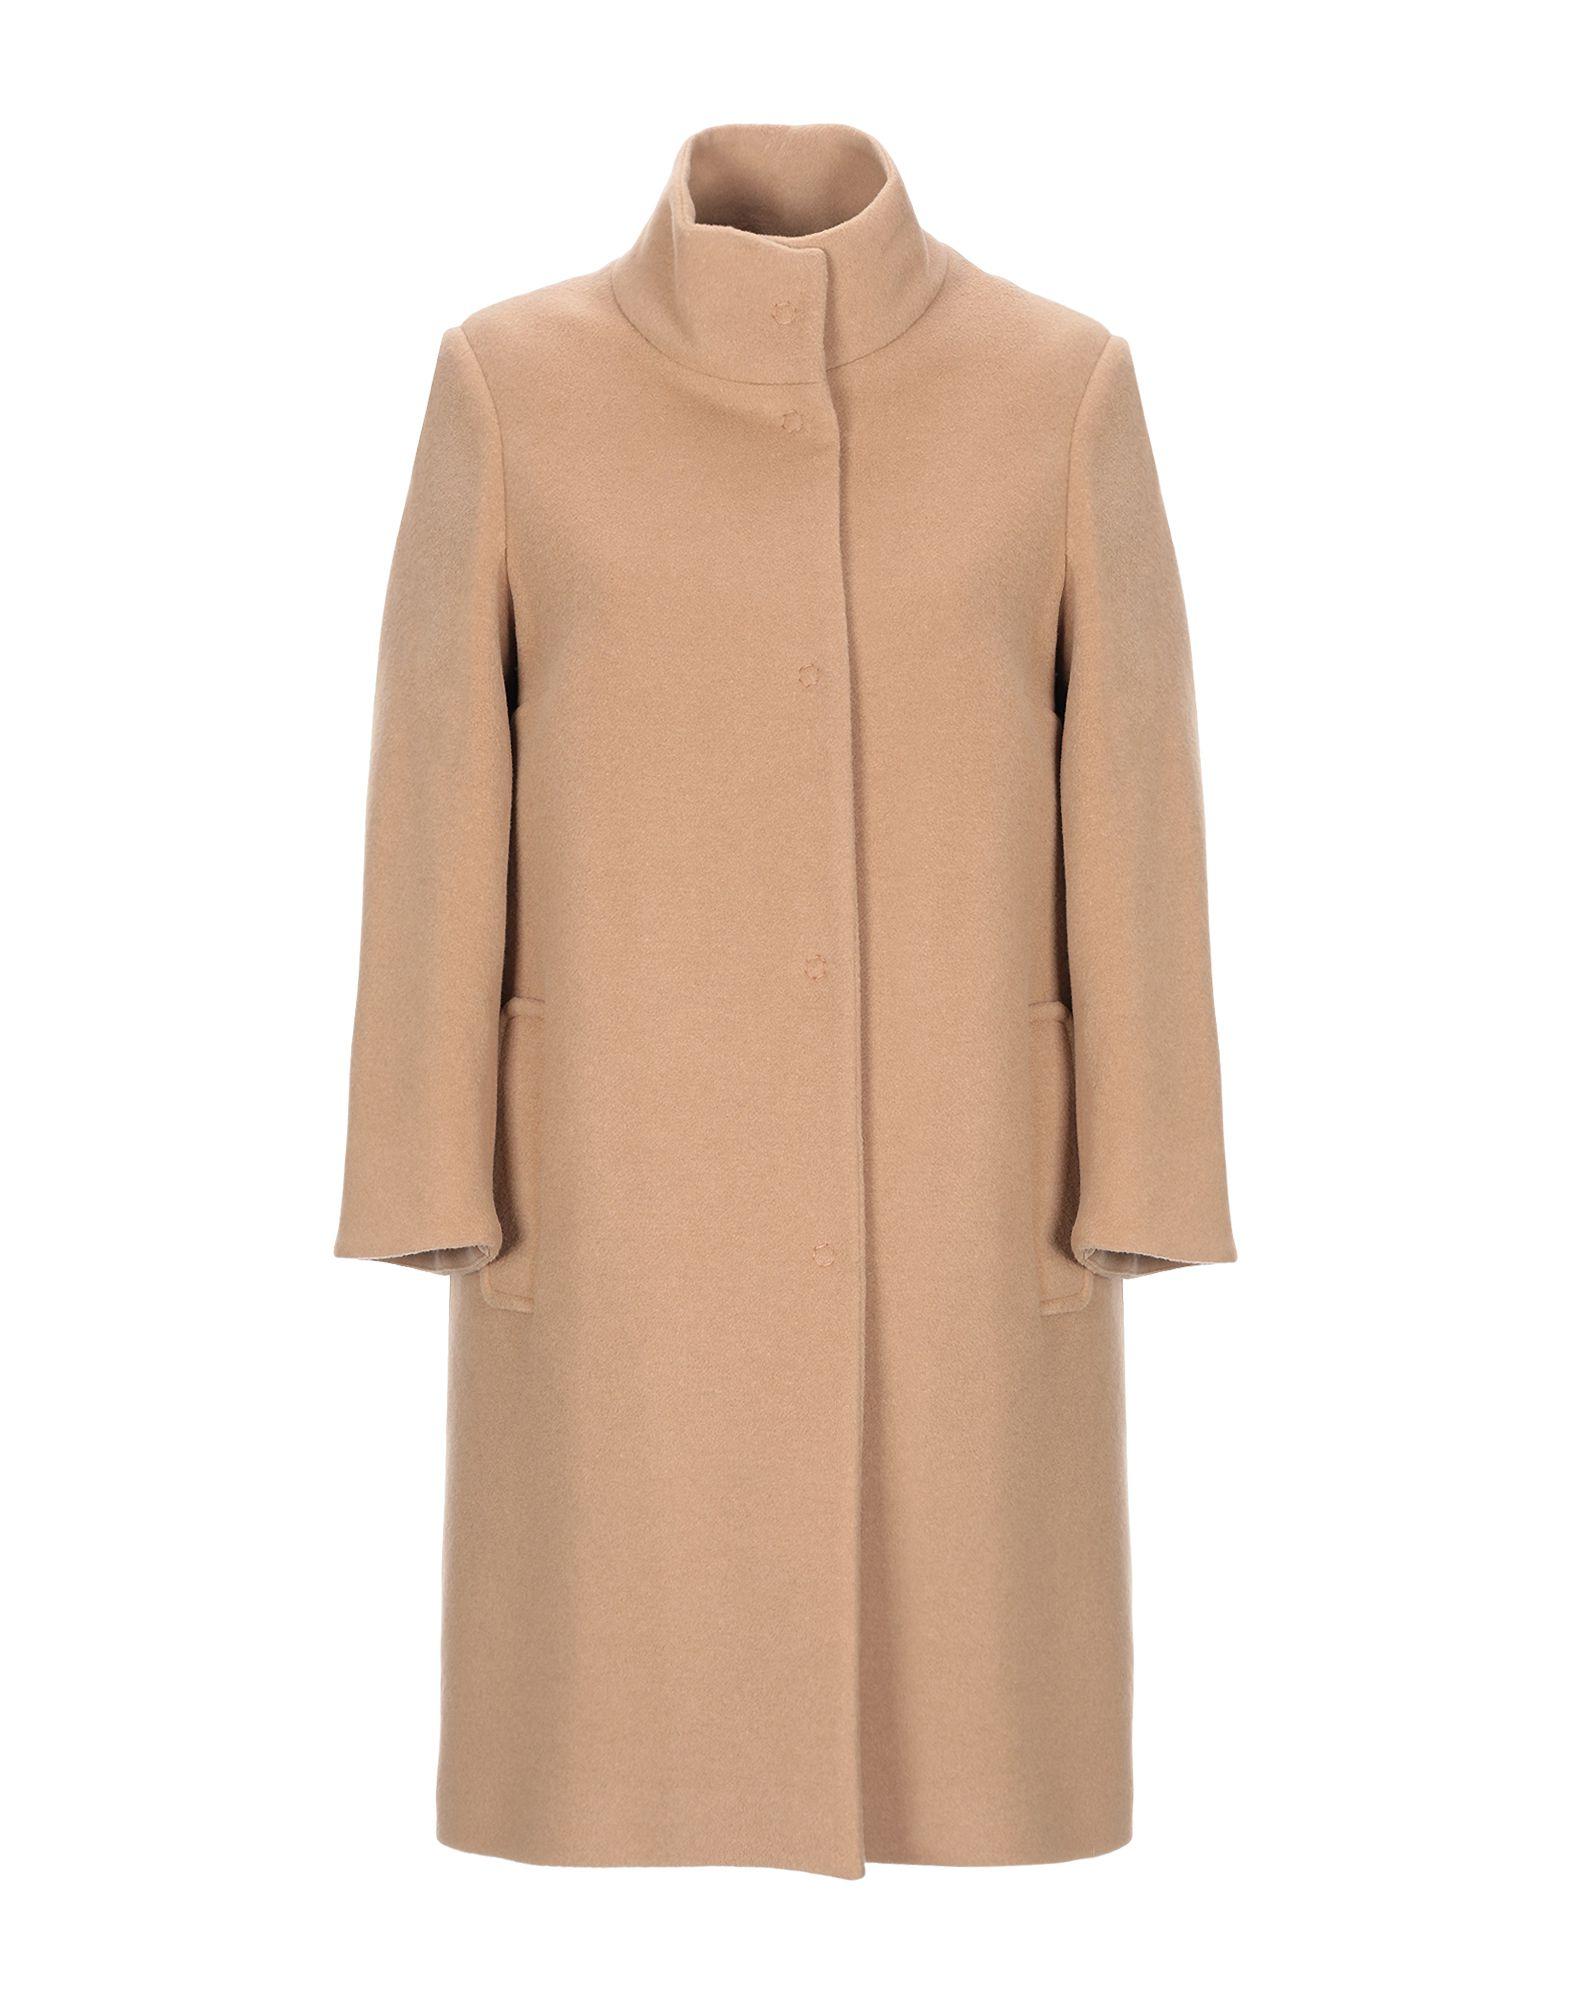 Annie P Wool Coat in Camel (Natural) - Lyst